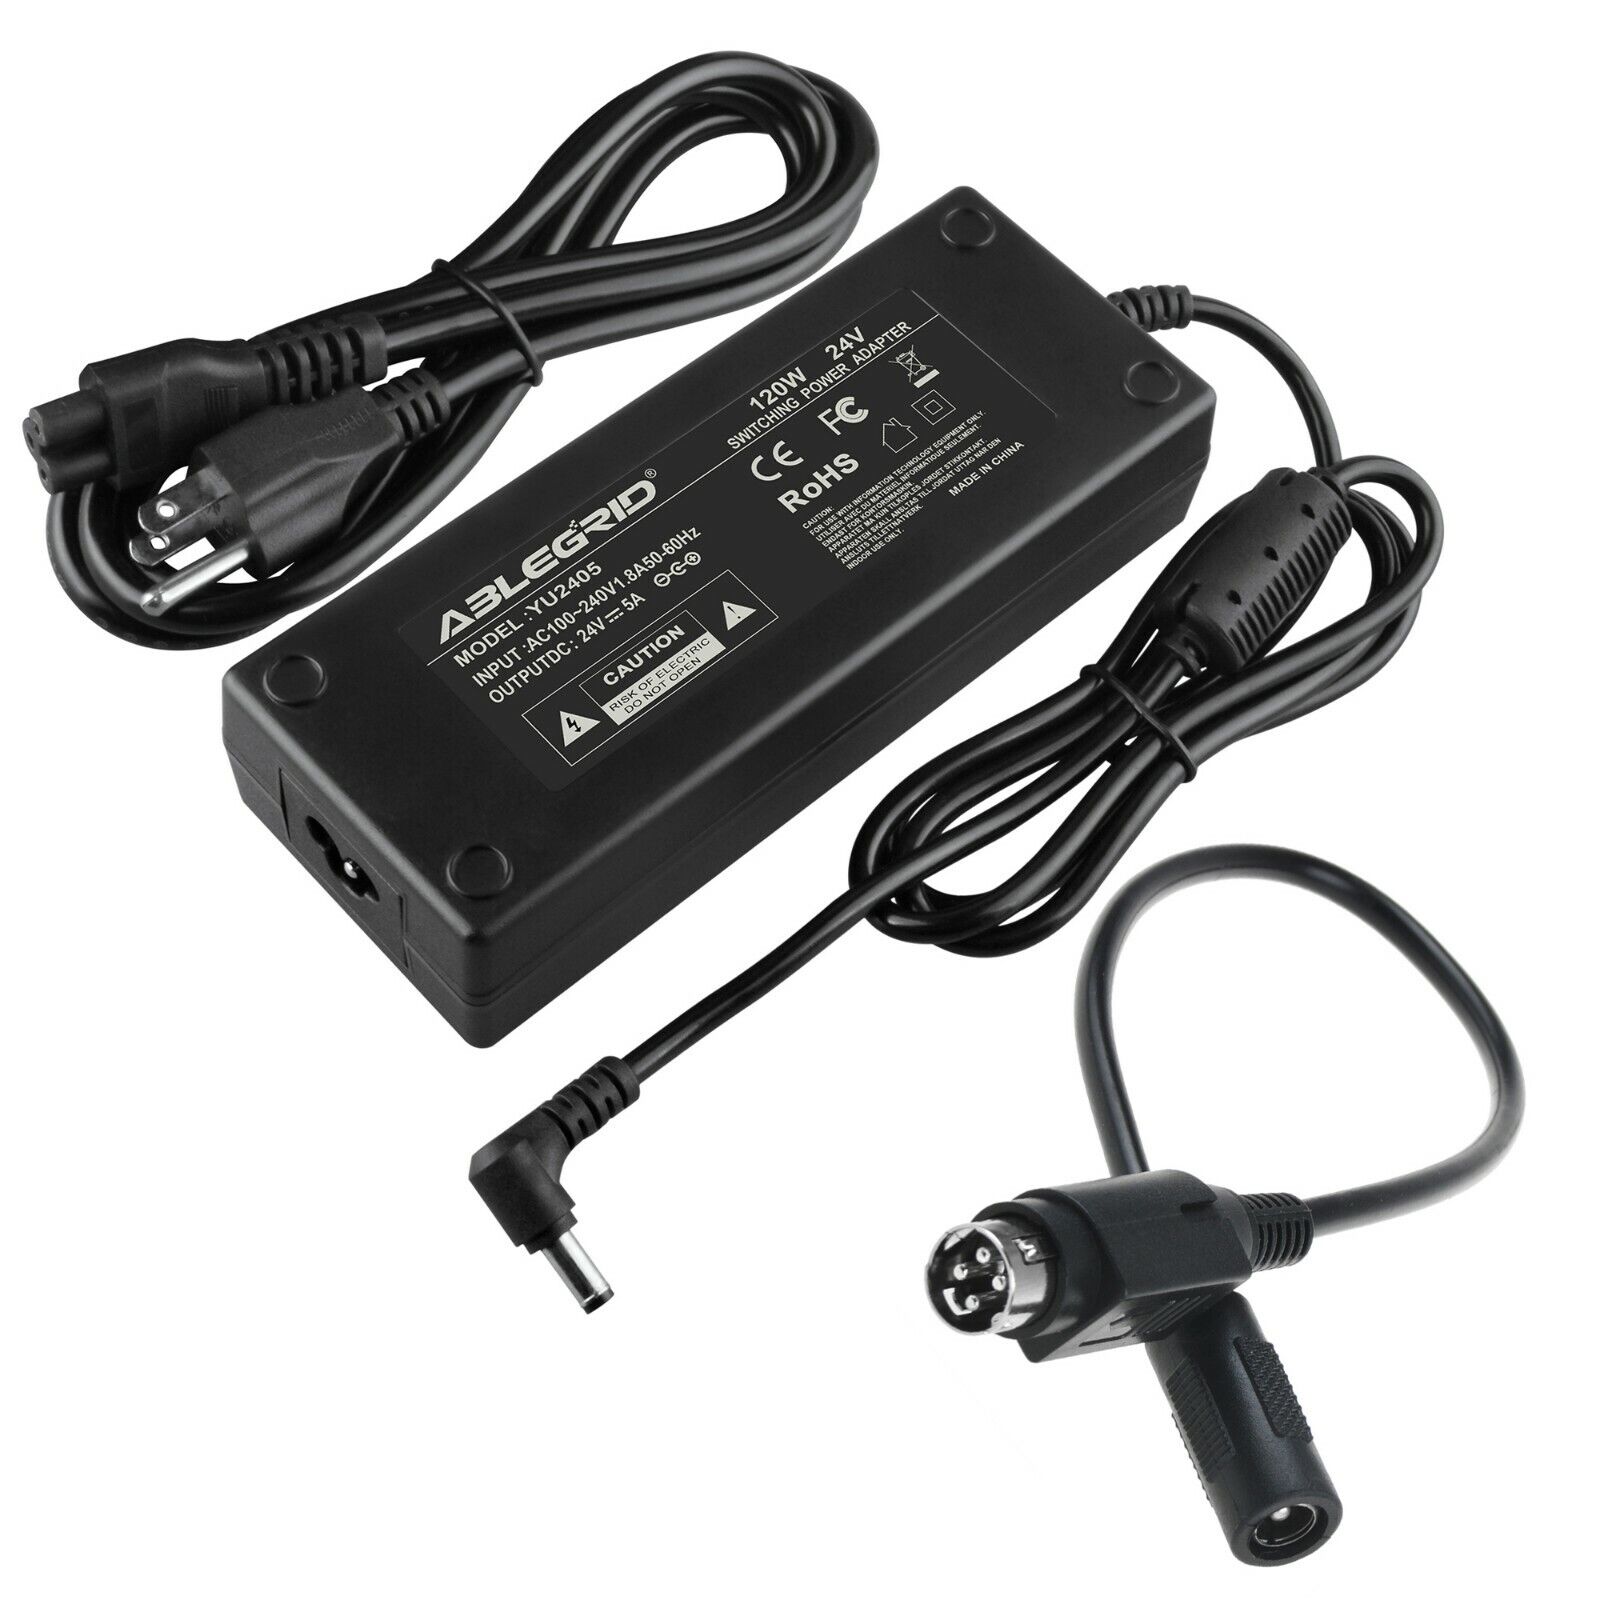 24V 5A 4 Pin AC Adapter Charger for Sharp IT23M1U IT-23M1U LCD TV Monitor Power